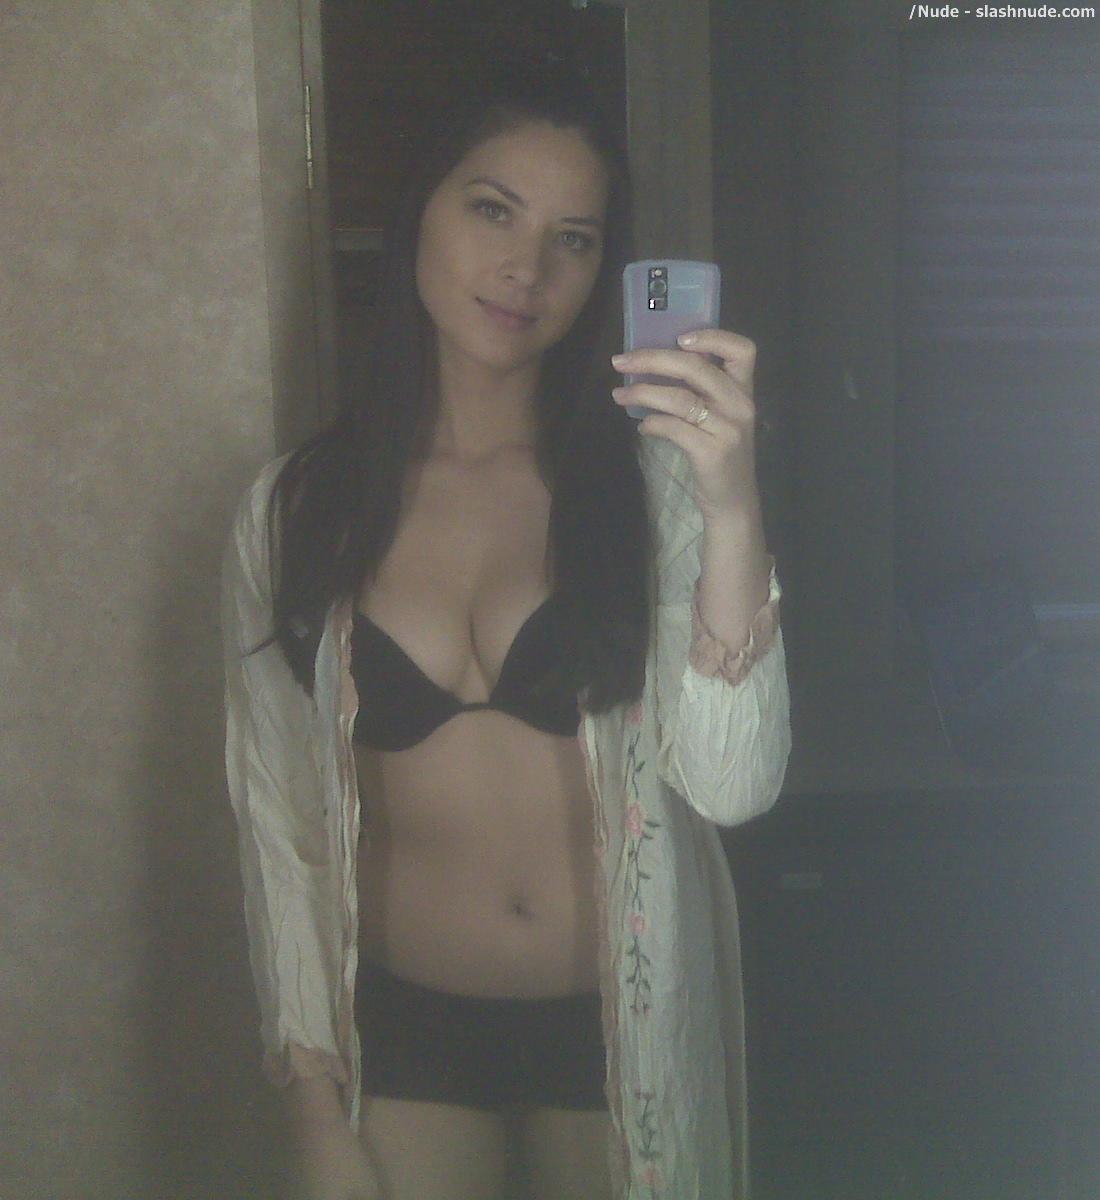 Olivia Munn Nude Photo Leaks Out After Phone Hack 6